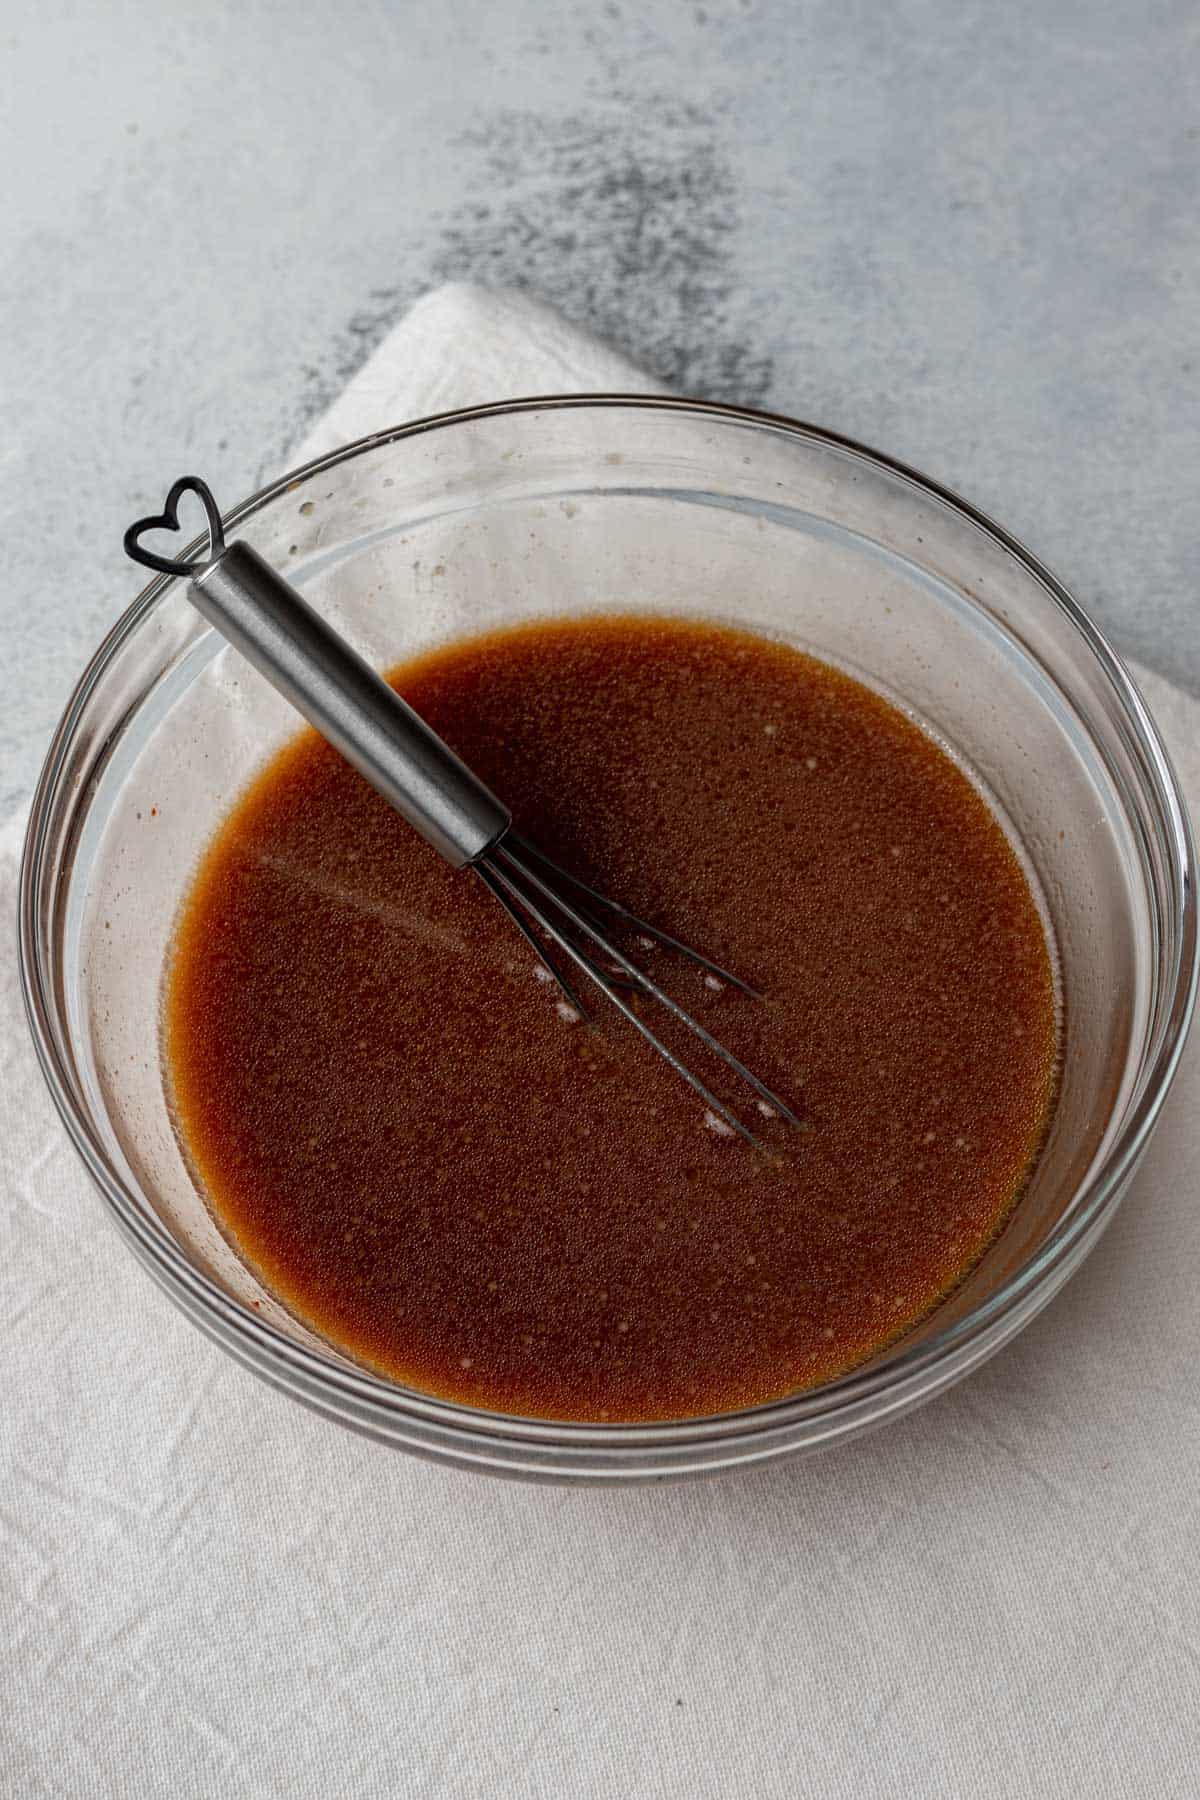 Sauce ingredients whisked together in a small mixing bowl.